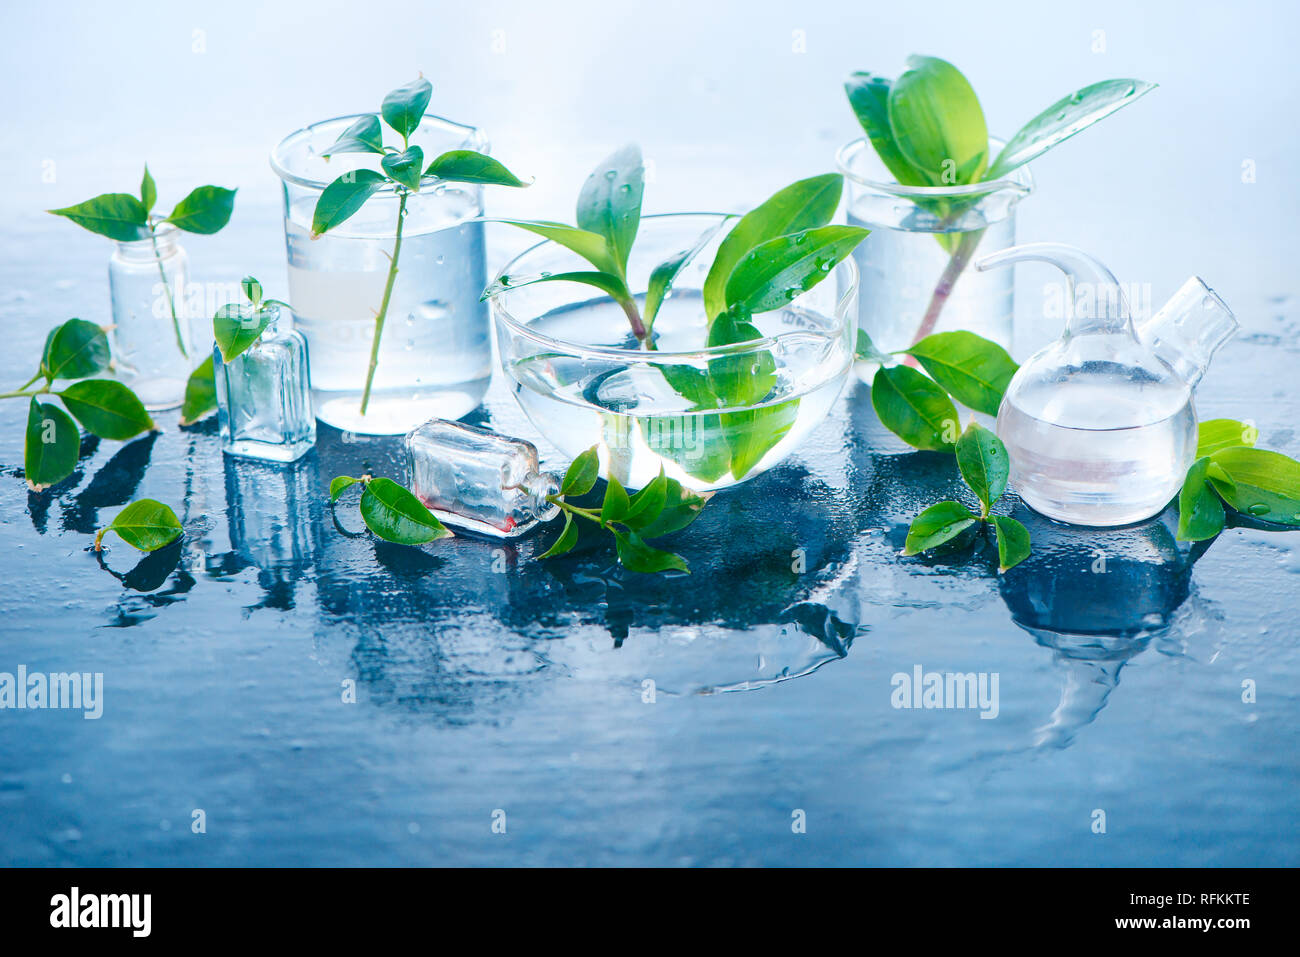 Green plants in glass jars header. Clarity and freshness concept with leaves and water. Light background with copy space Stock Photo